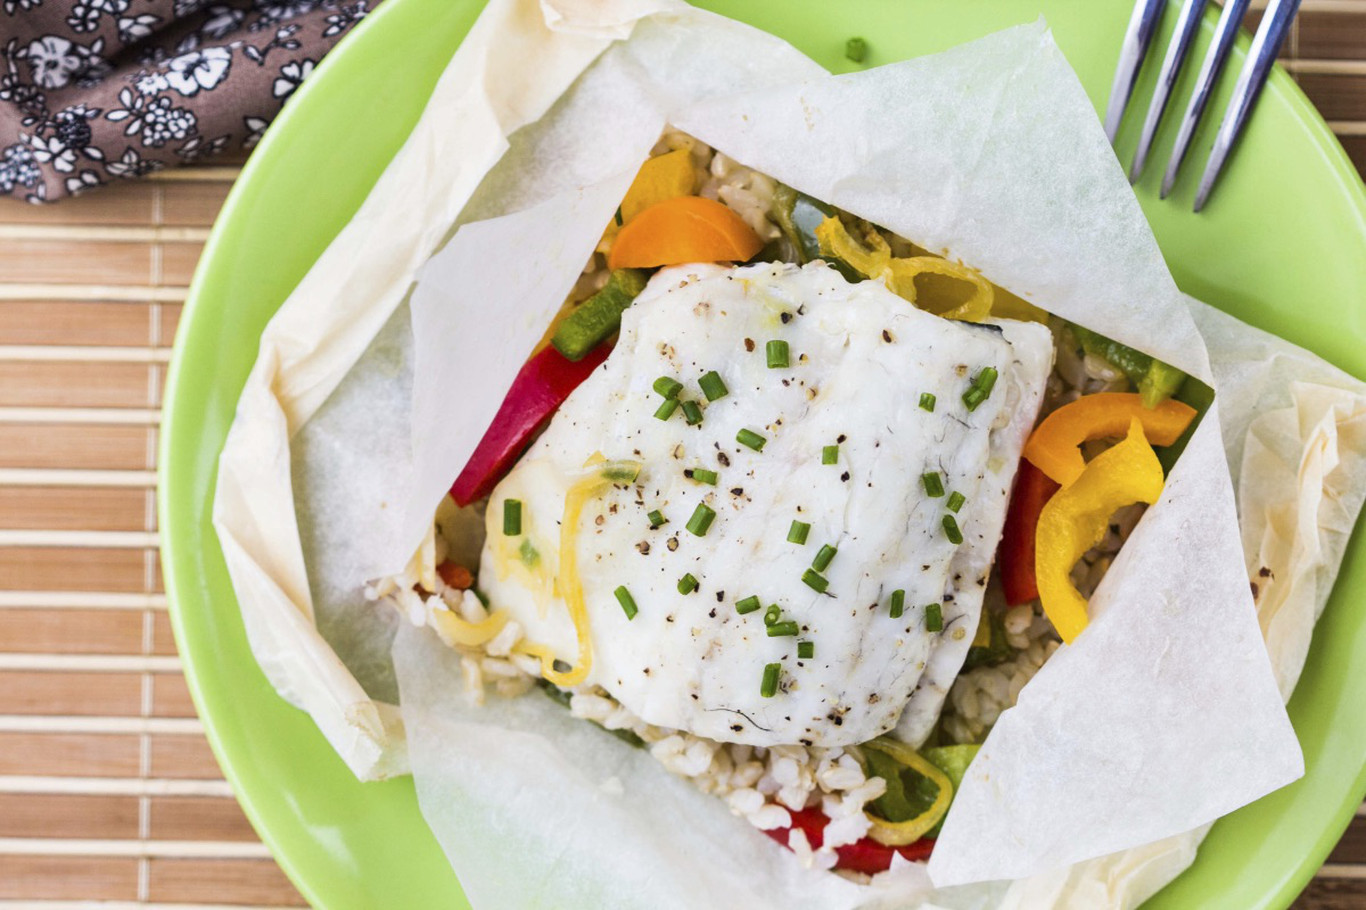 Air Fryer Halibut with Vegetables (Halibut en Papillote) - Stem and Spoon